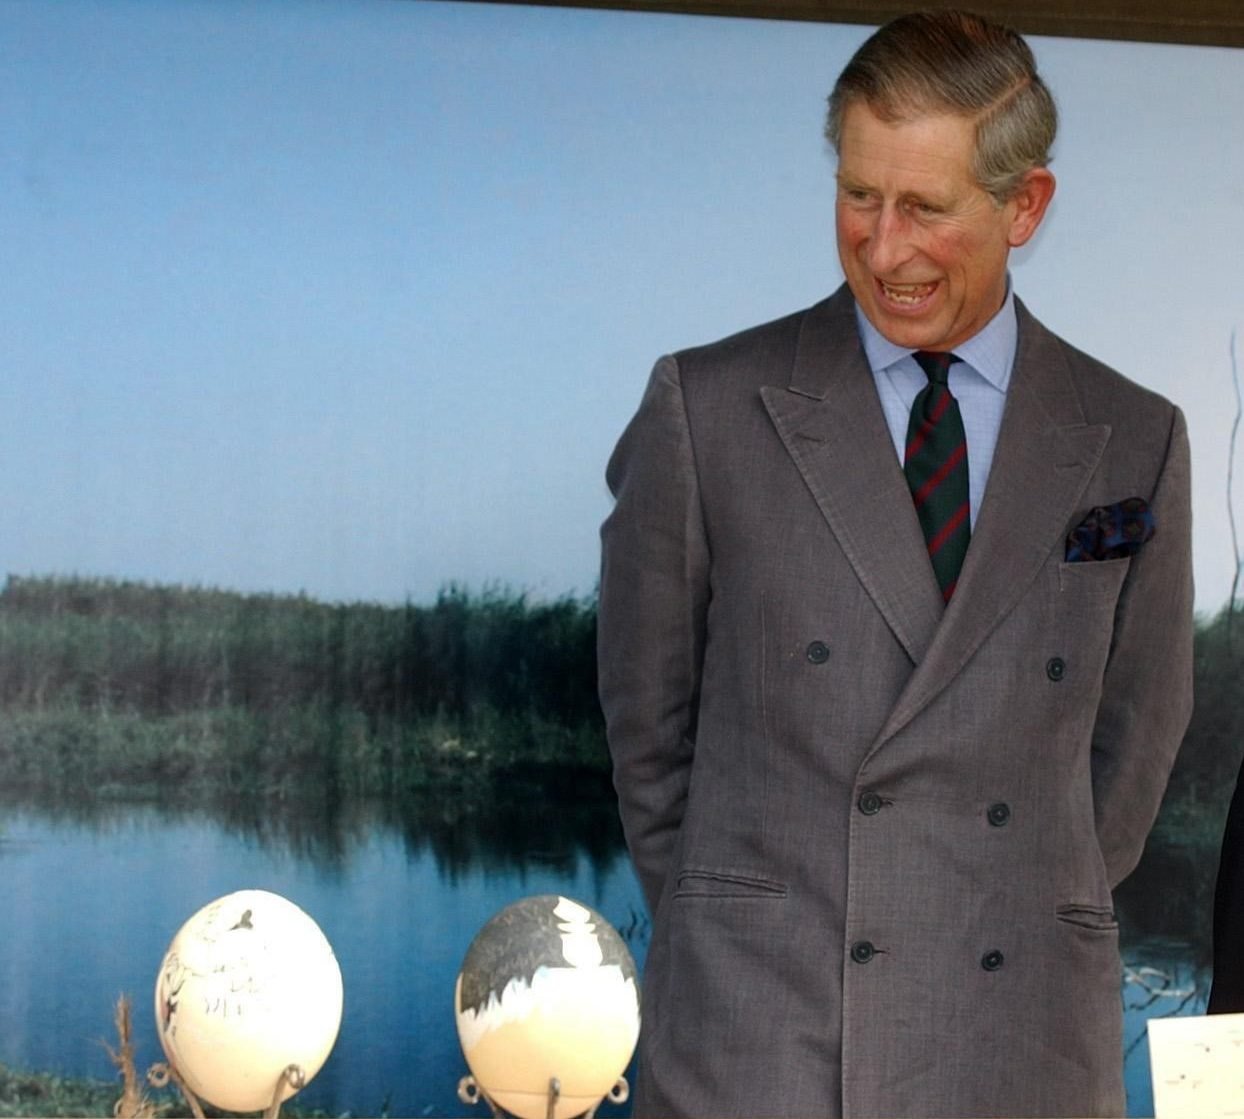 Prince Charles’ Staff Wastes Over 3 Dozen Eggs a Week to Get His Breakfast Just Right